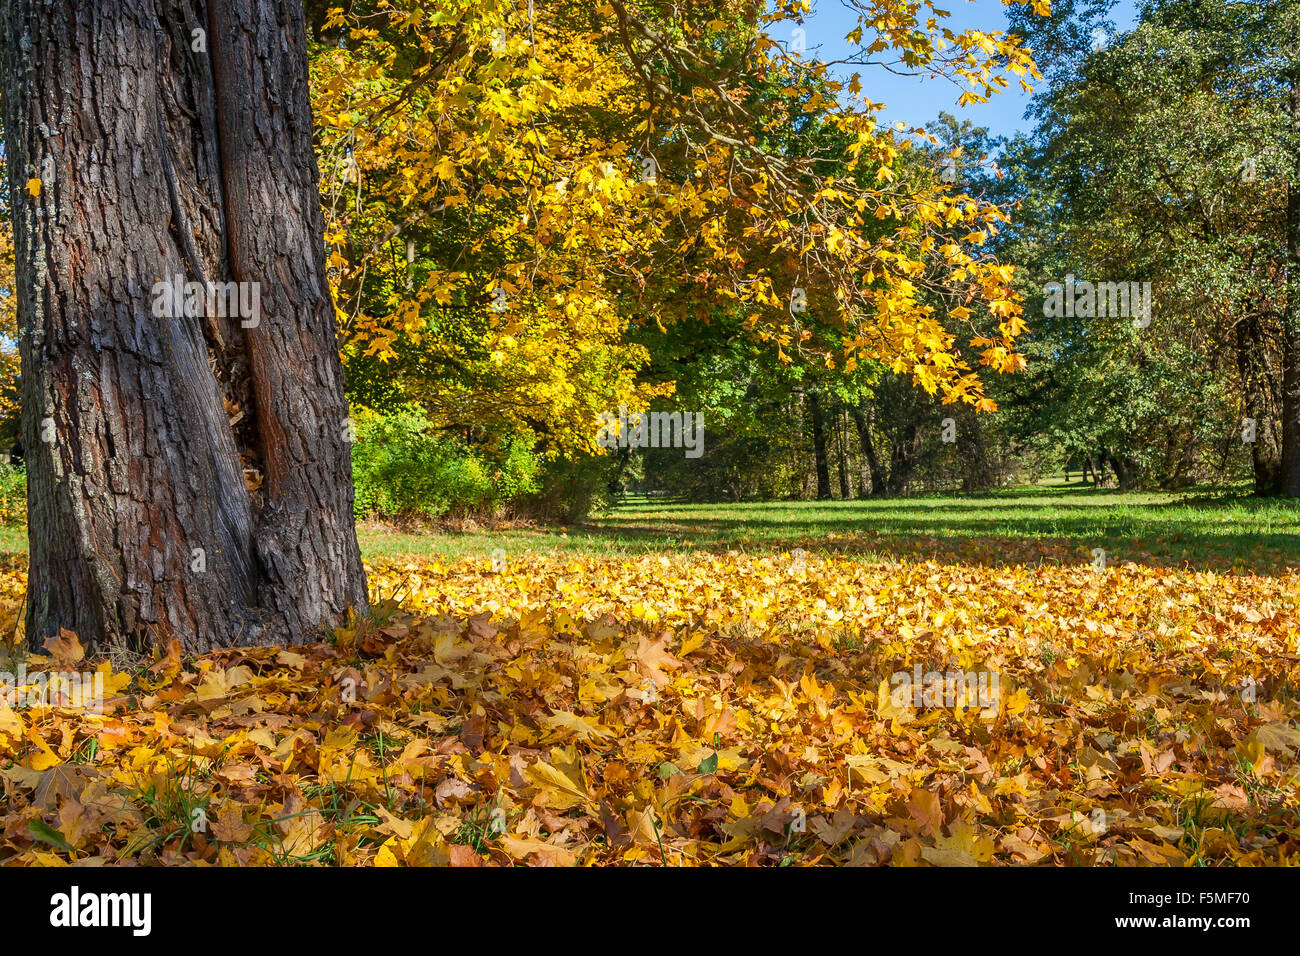 Leaves Falling From An Autumn Tree Stock Photo